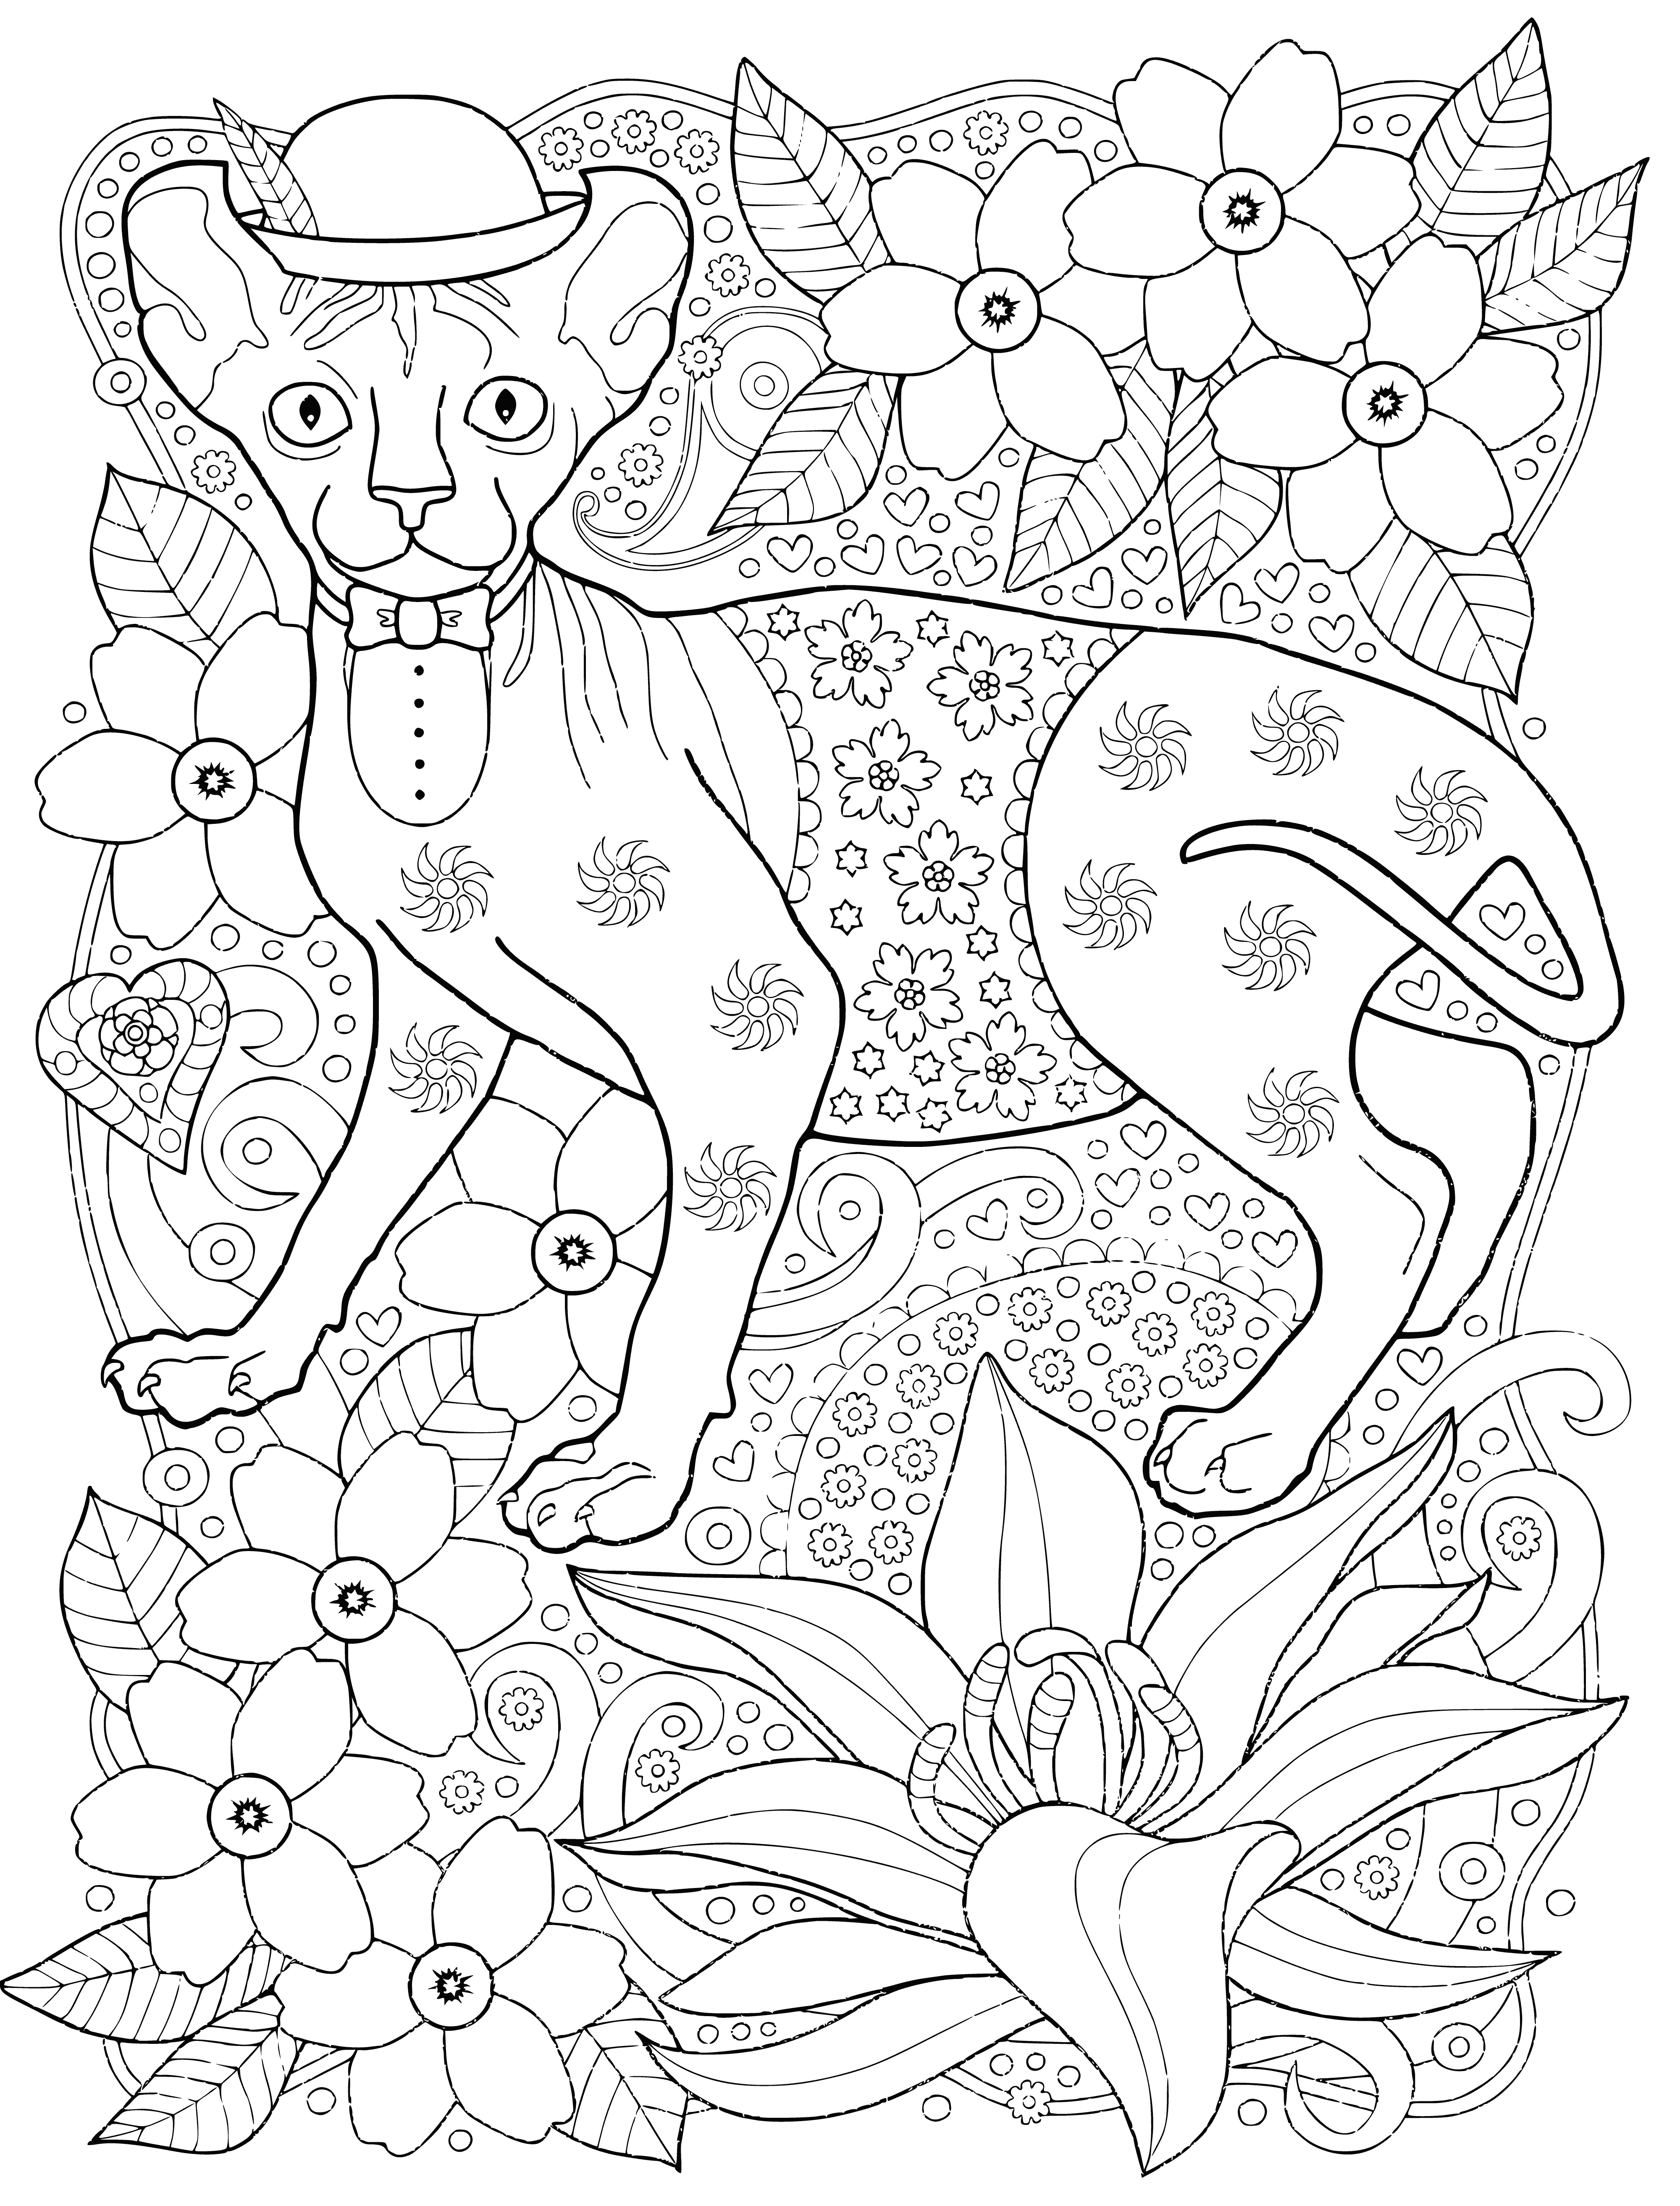 Sphinx in a hat coloring page